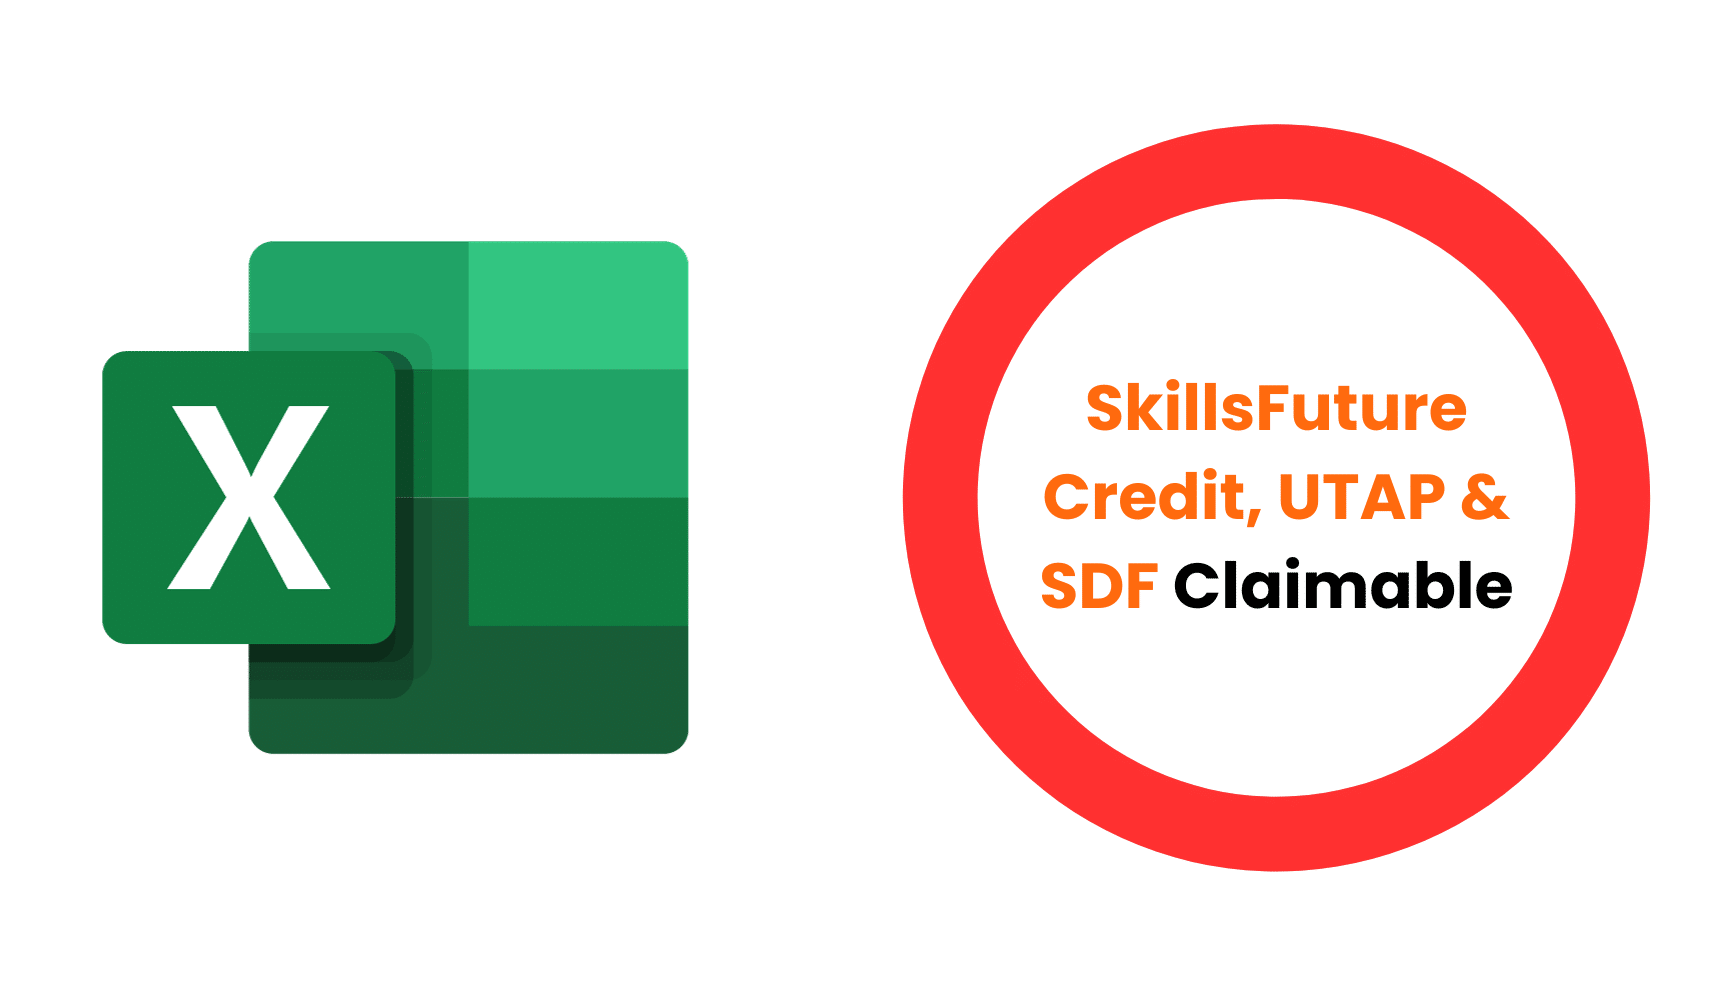 Microsoft Excel Courses in Singapore - SkillsFuture Credit, UTAP & SDF Claimable